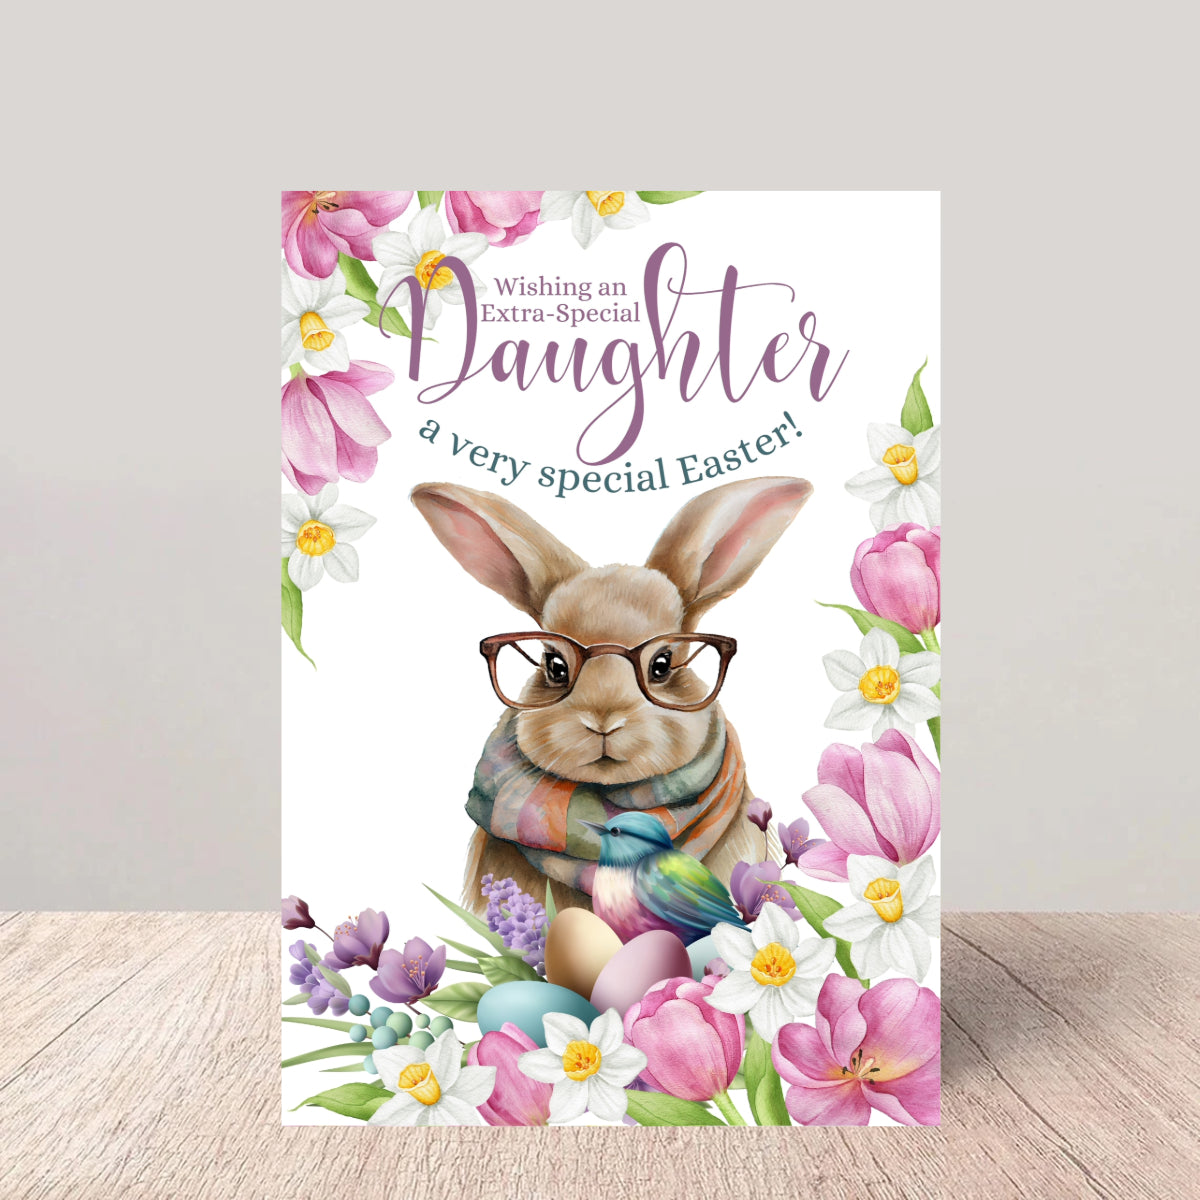 Daughter Easter Greetings Card - Whimsical Bunny and Spring Flowers